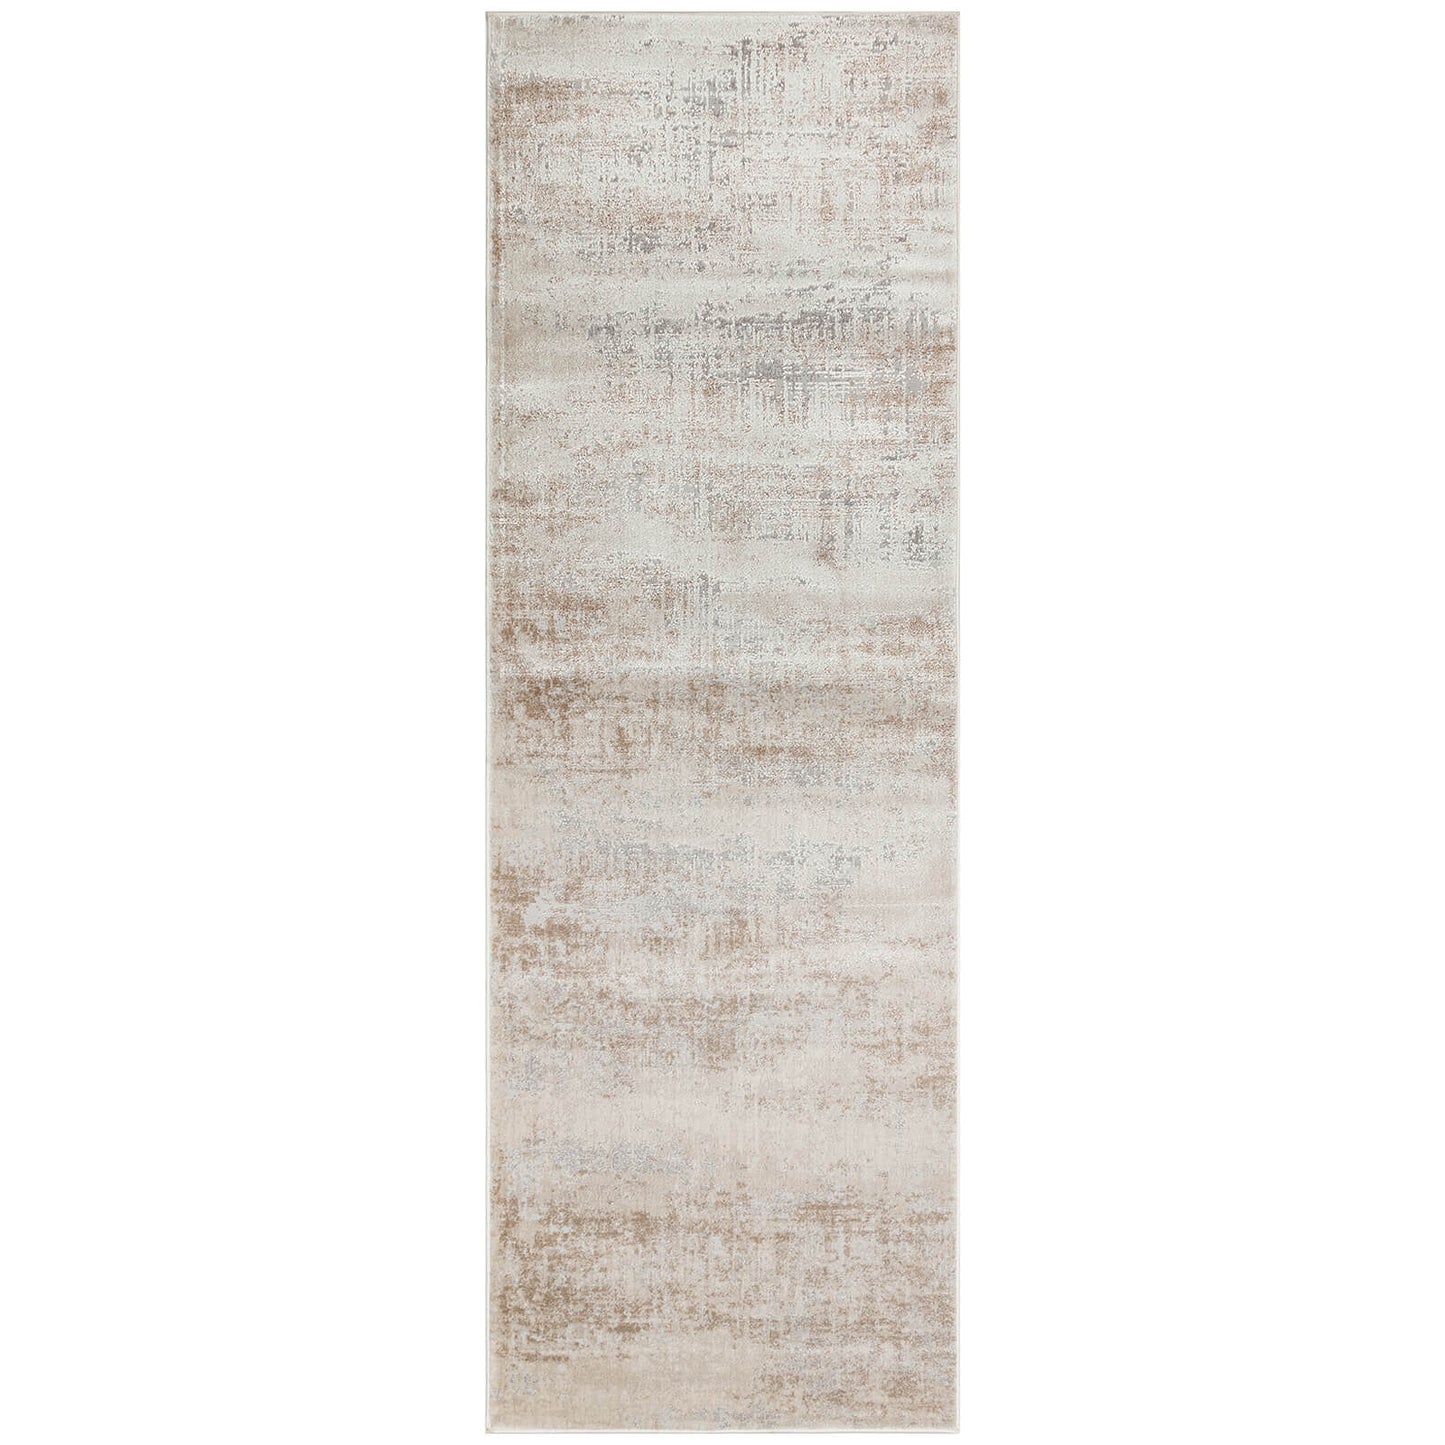 Luzon LUZ809 White and Cream Abstract Rugs